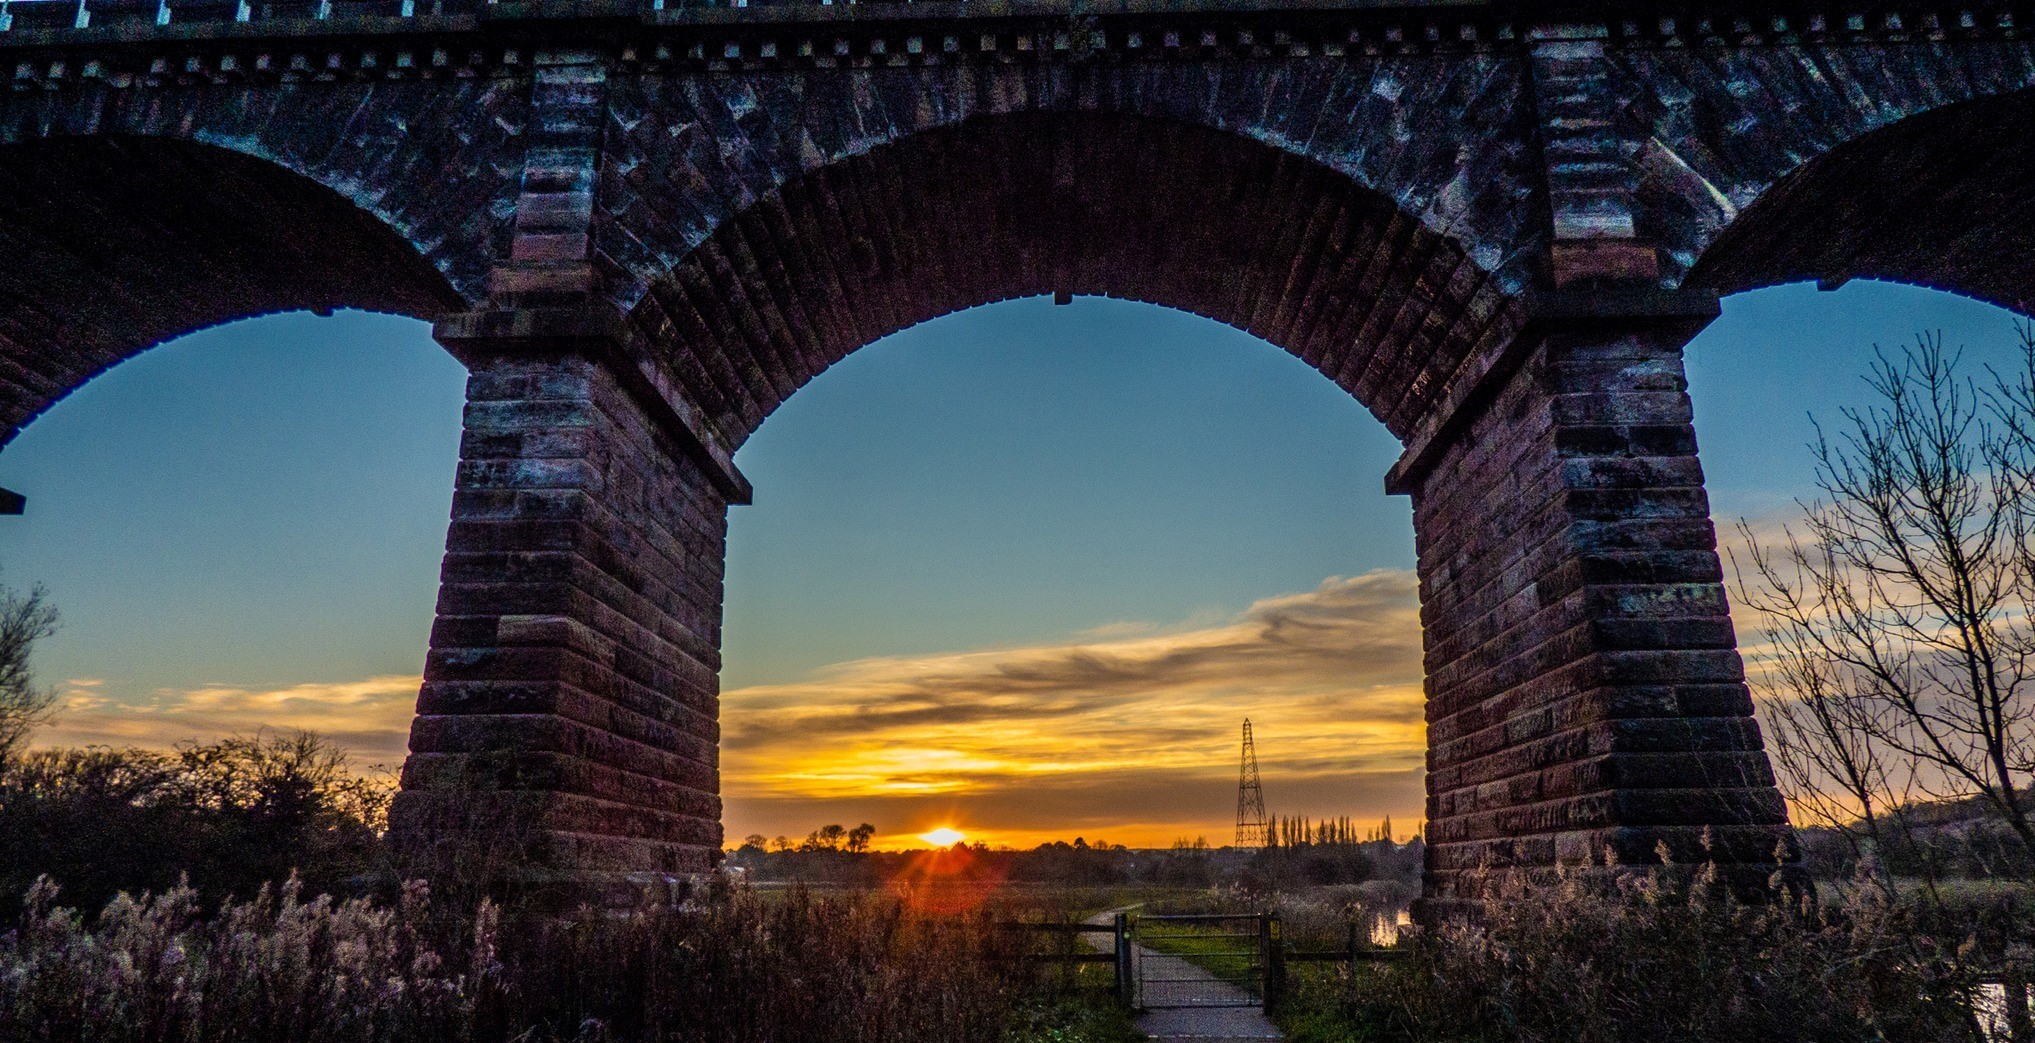 Sunset at Dutton Viaduct by Andrew Gardner